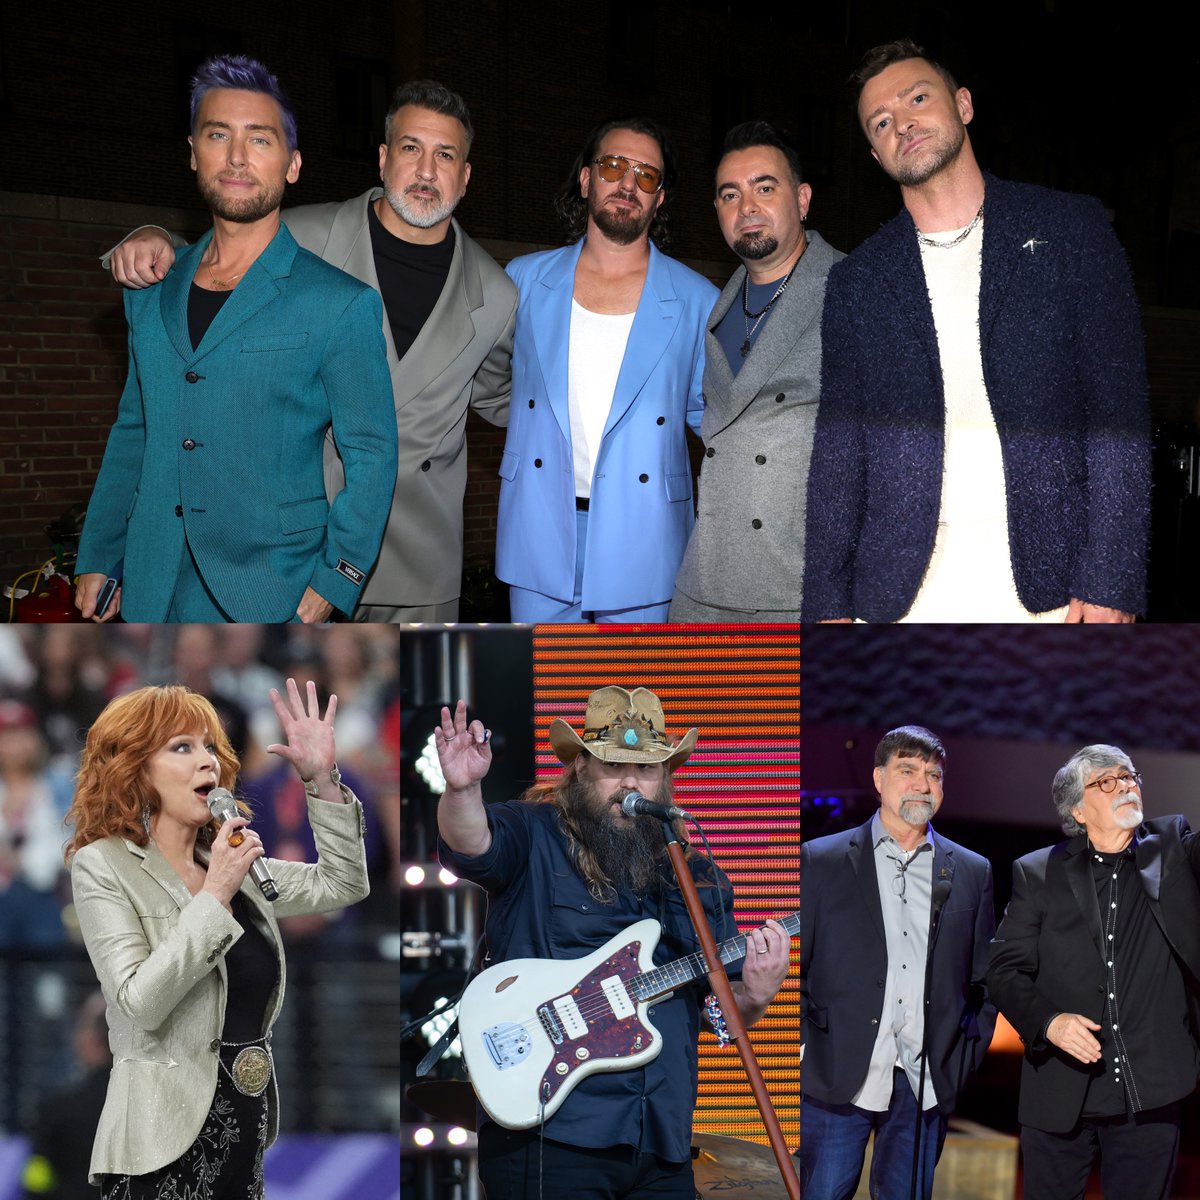 Talk about a crossover episode! We’re celebrating @NSYNC’s new music by looking into their country connections! Do you remember these collabs with @reba, @ChrisStapleton, and @TheAlabamaBand? We’ll remind you- flip to @CMT now!